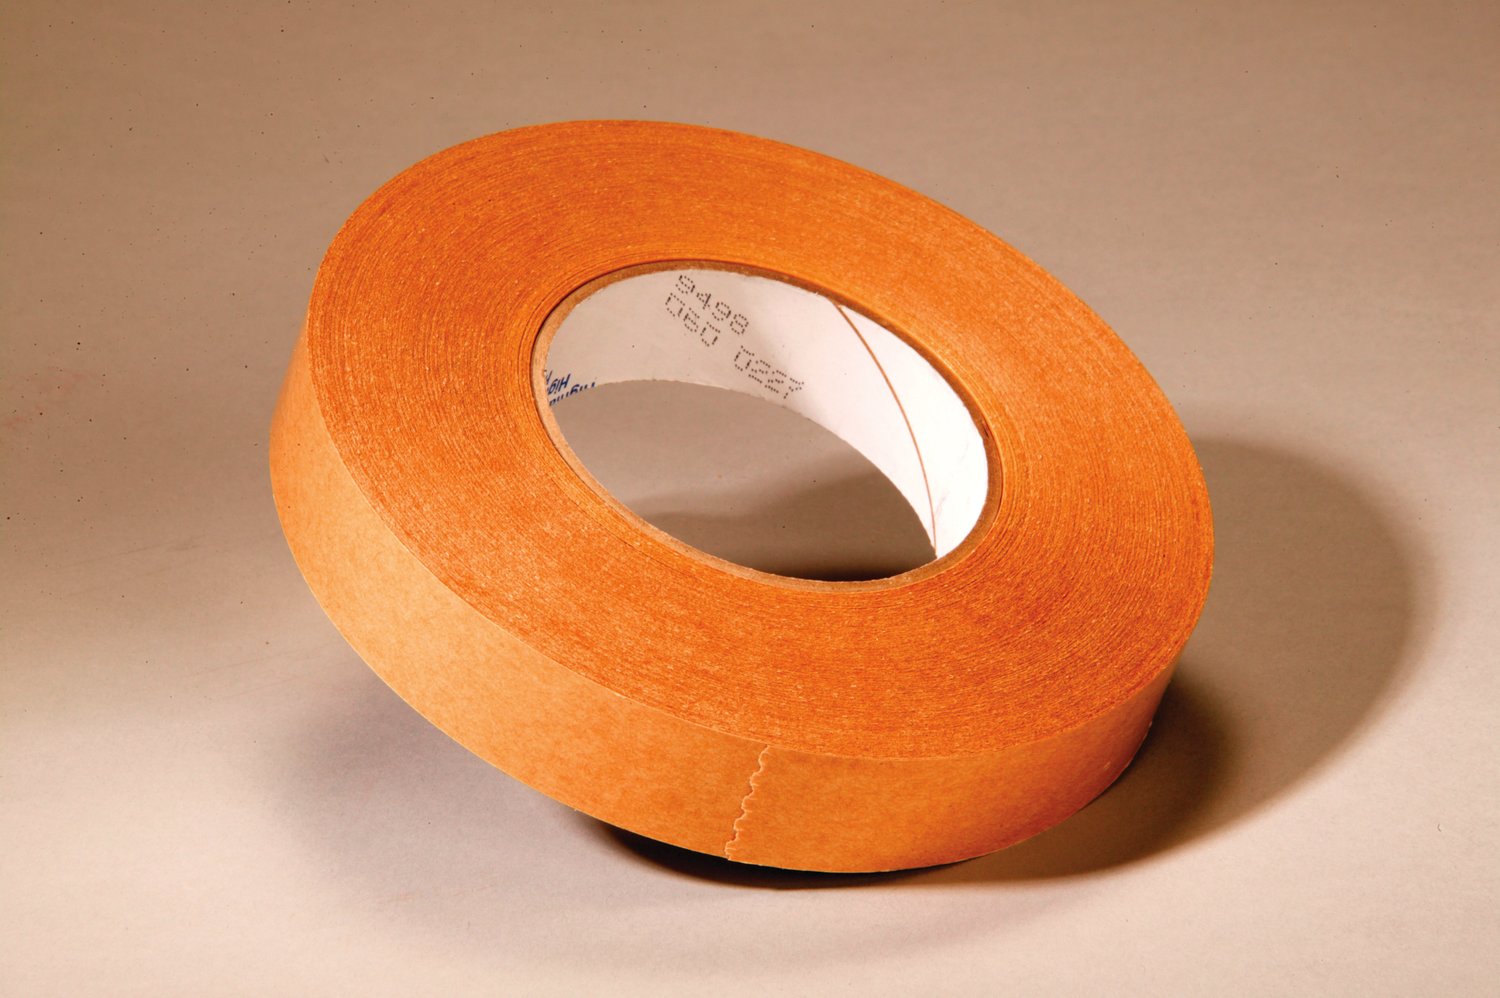 7010374798 - 3M Adhesive Transfer Tape 9498, Clear, 1/2 in x 120 yd, 2 mil, 72 rolls
per case, Lathe Slit